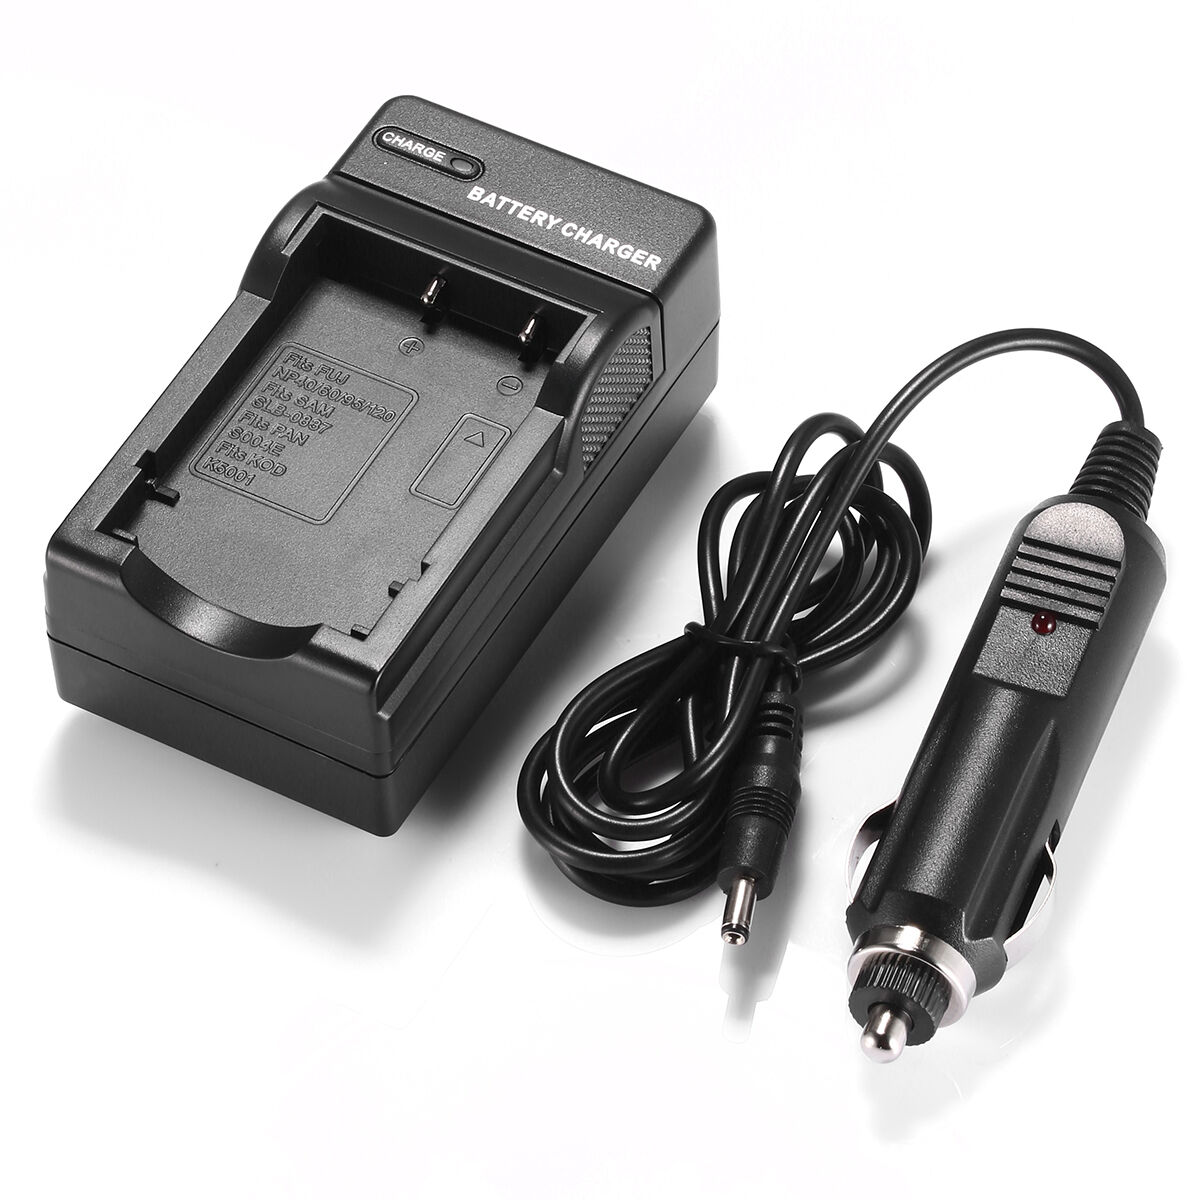 CASIO Exilim EX-S10SR battery charger